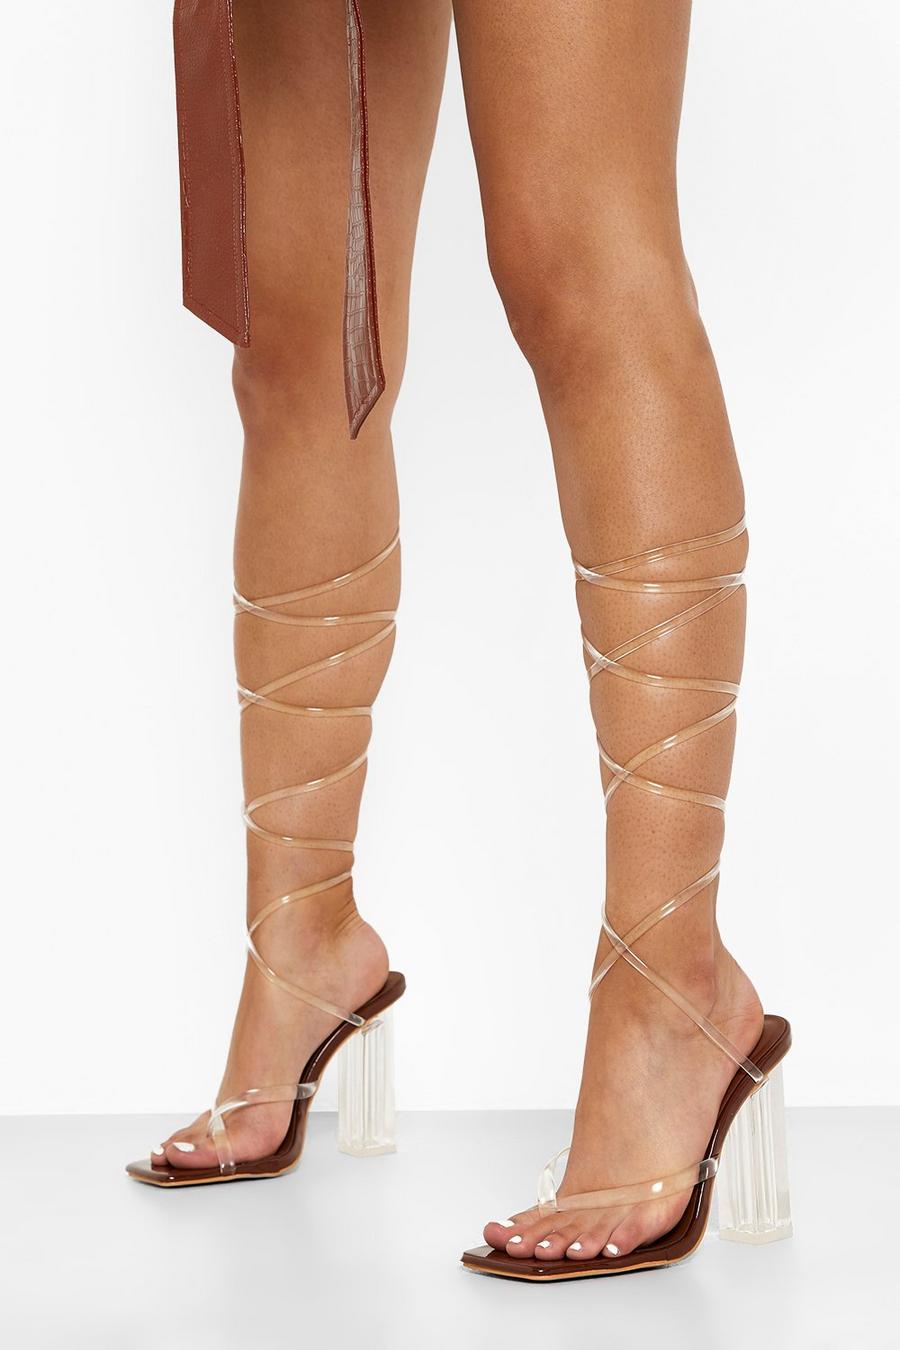 Chocolate marron Clear Patent Strappy Heels